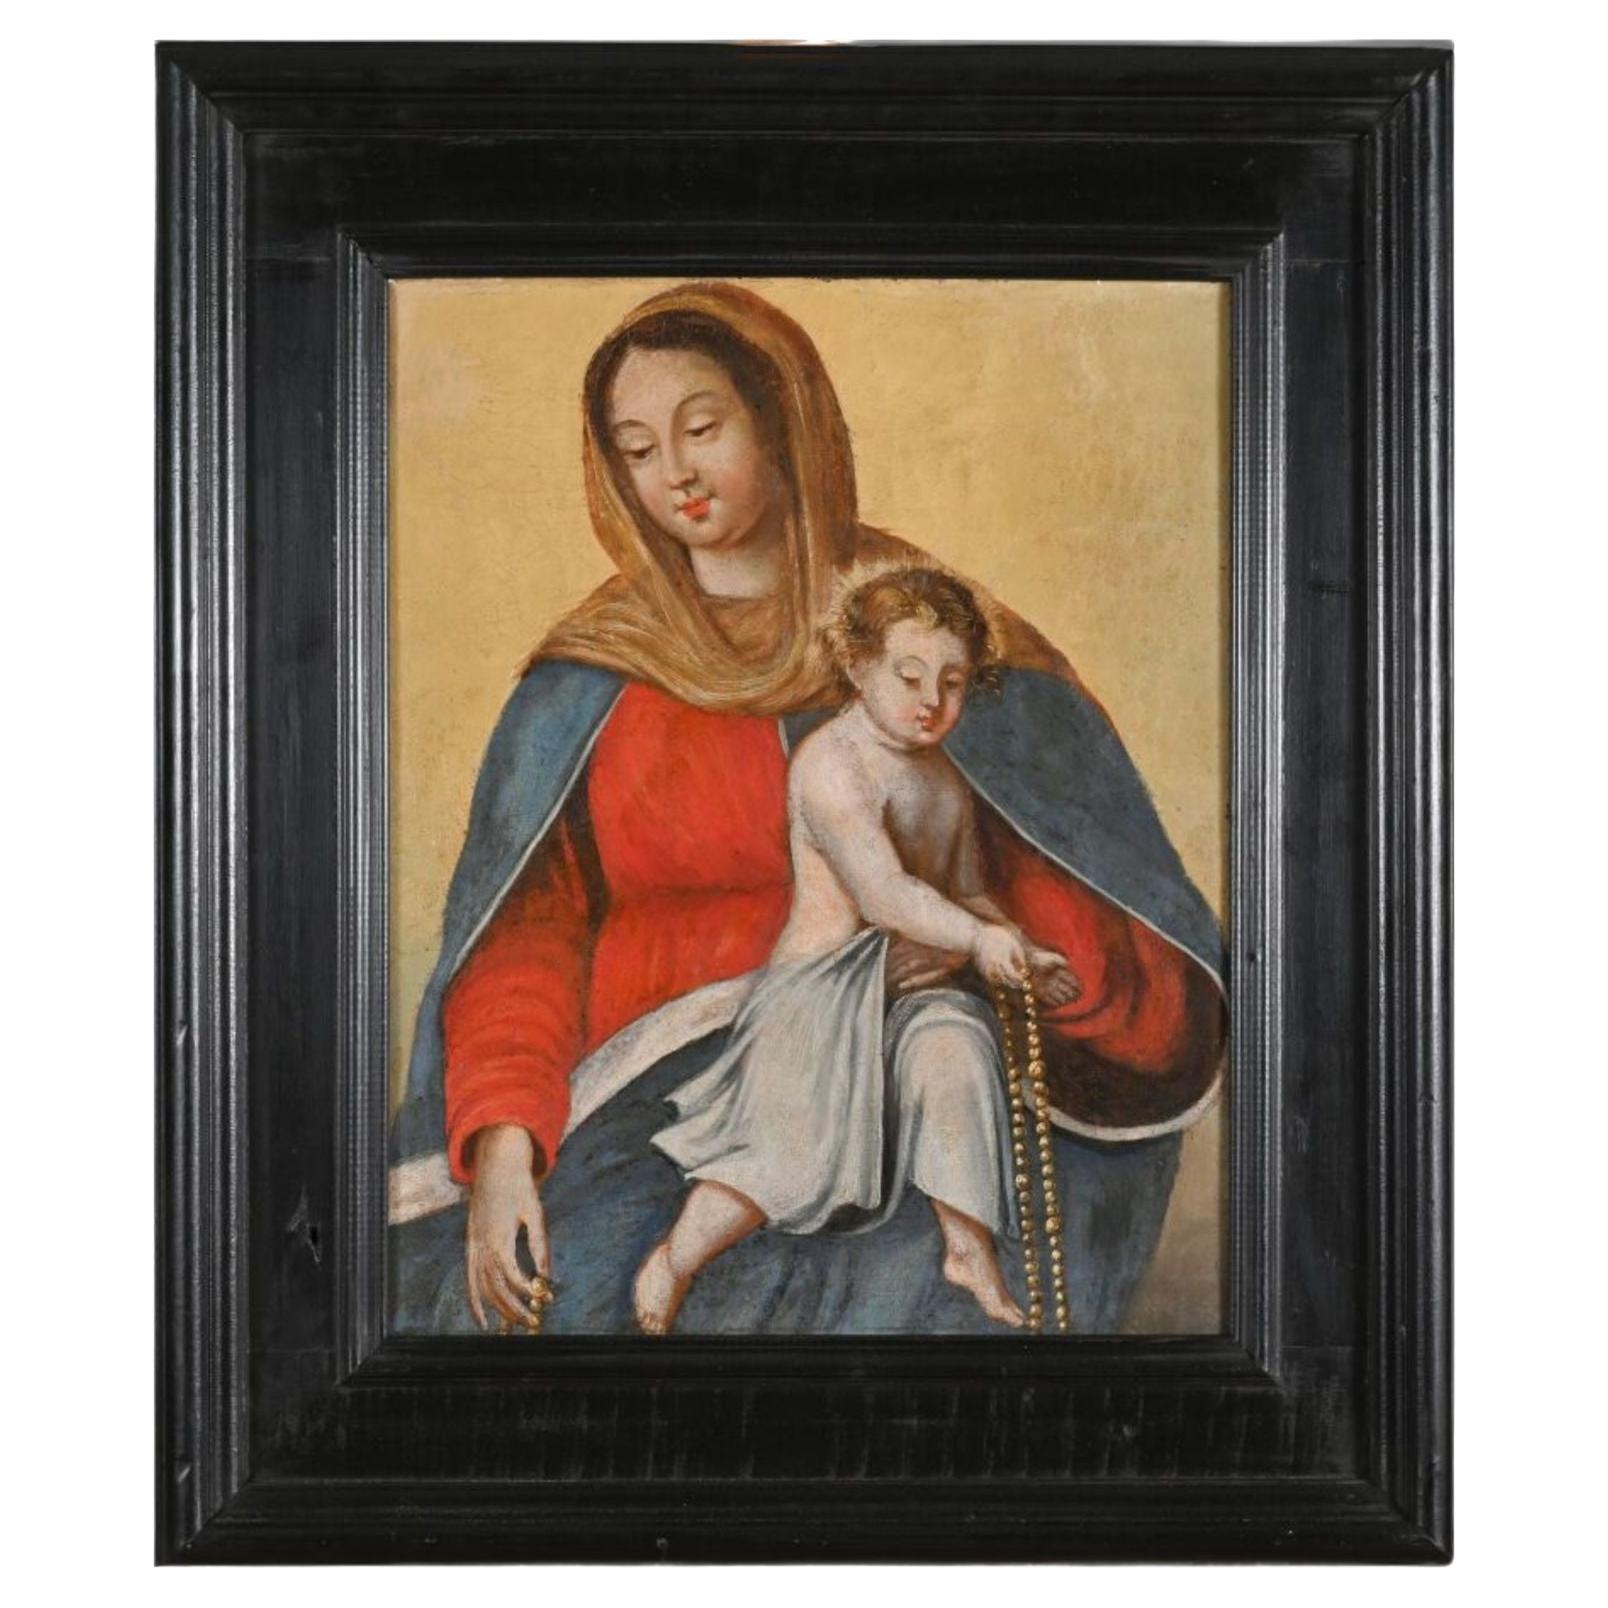 17th century French School  "Virgin and Child (Virgin of the Rosary)" For Sale